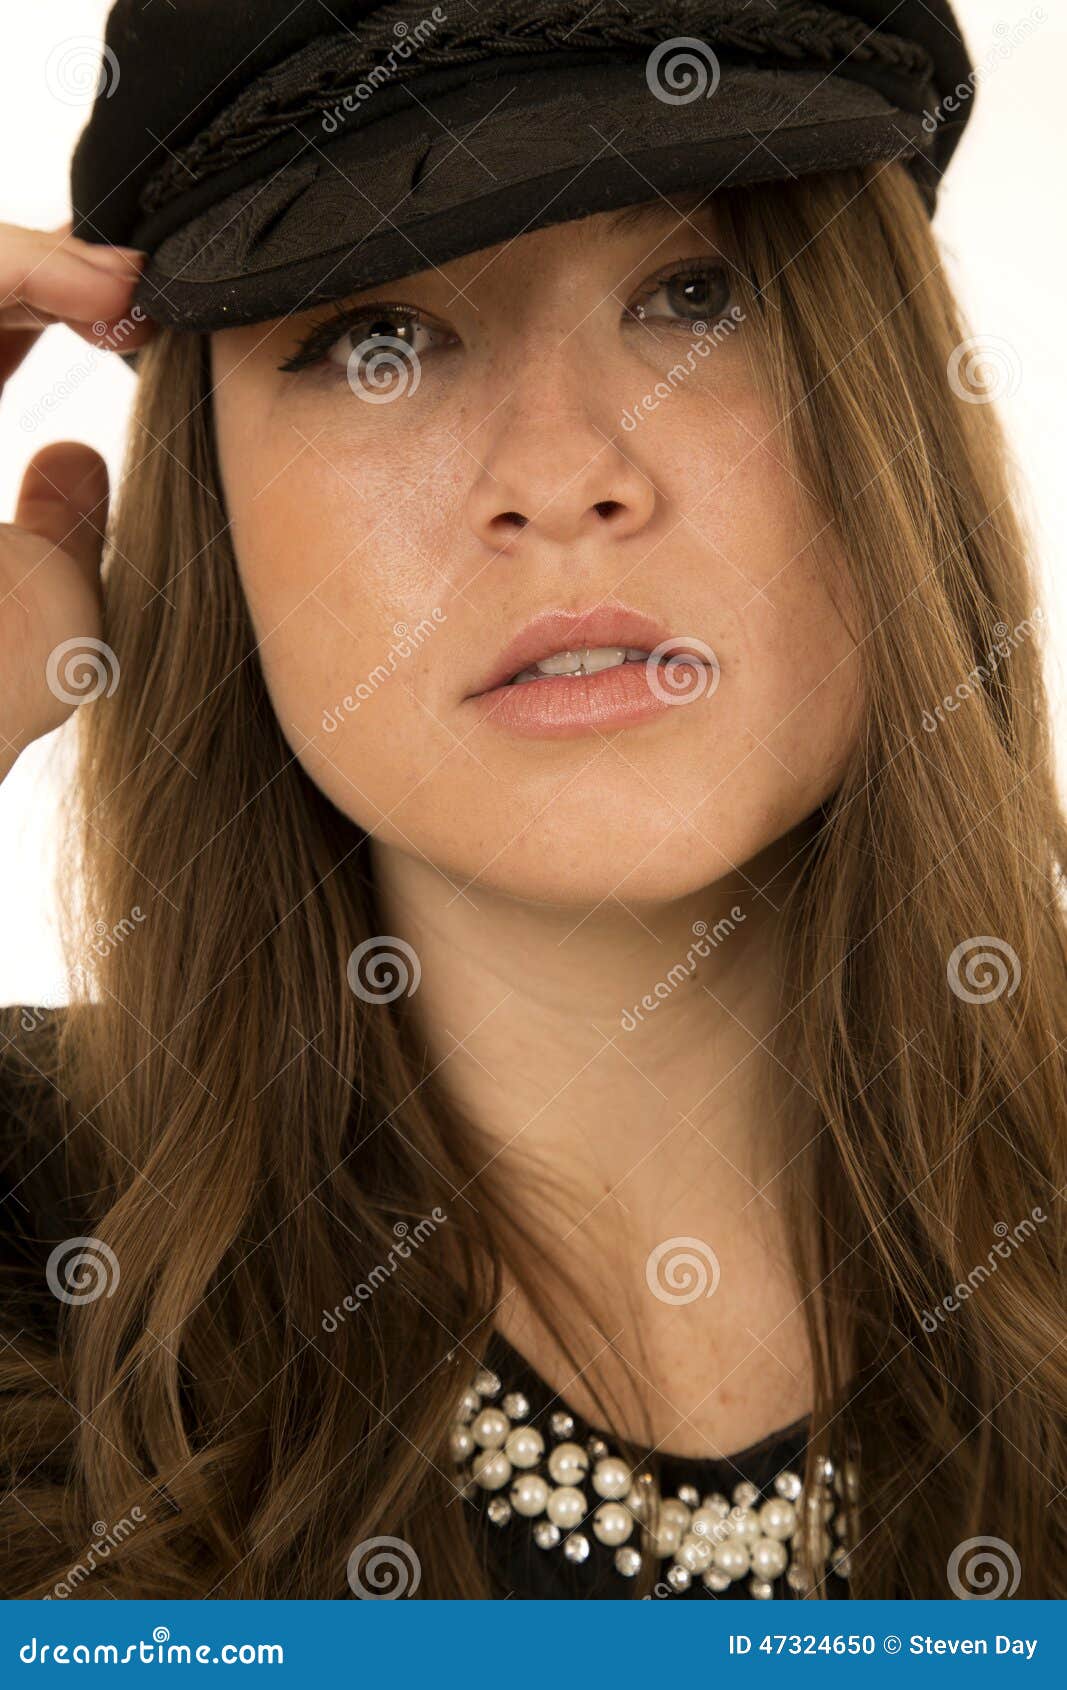 Woman Wearing Black Hat Looking at Camera Somber Look Stock Photo ...